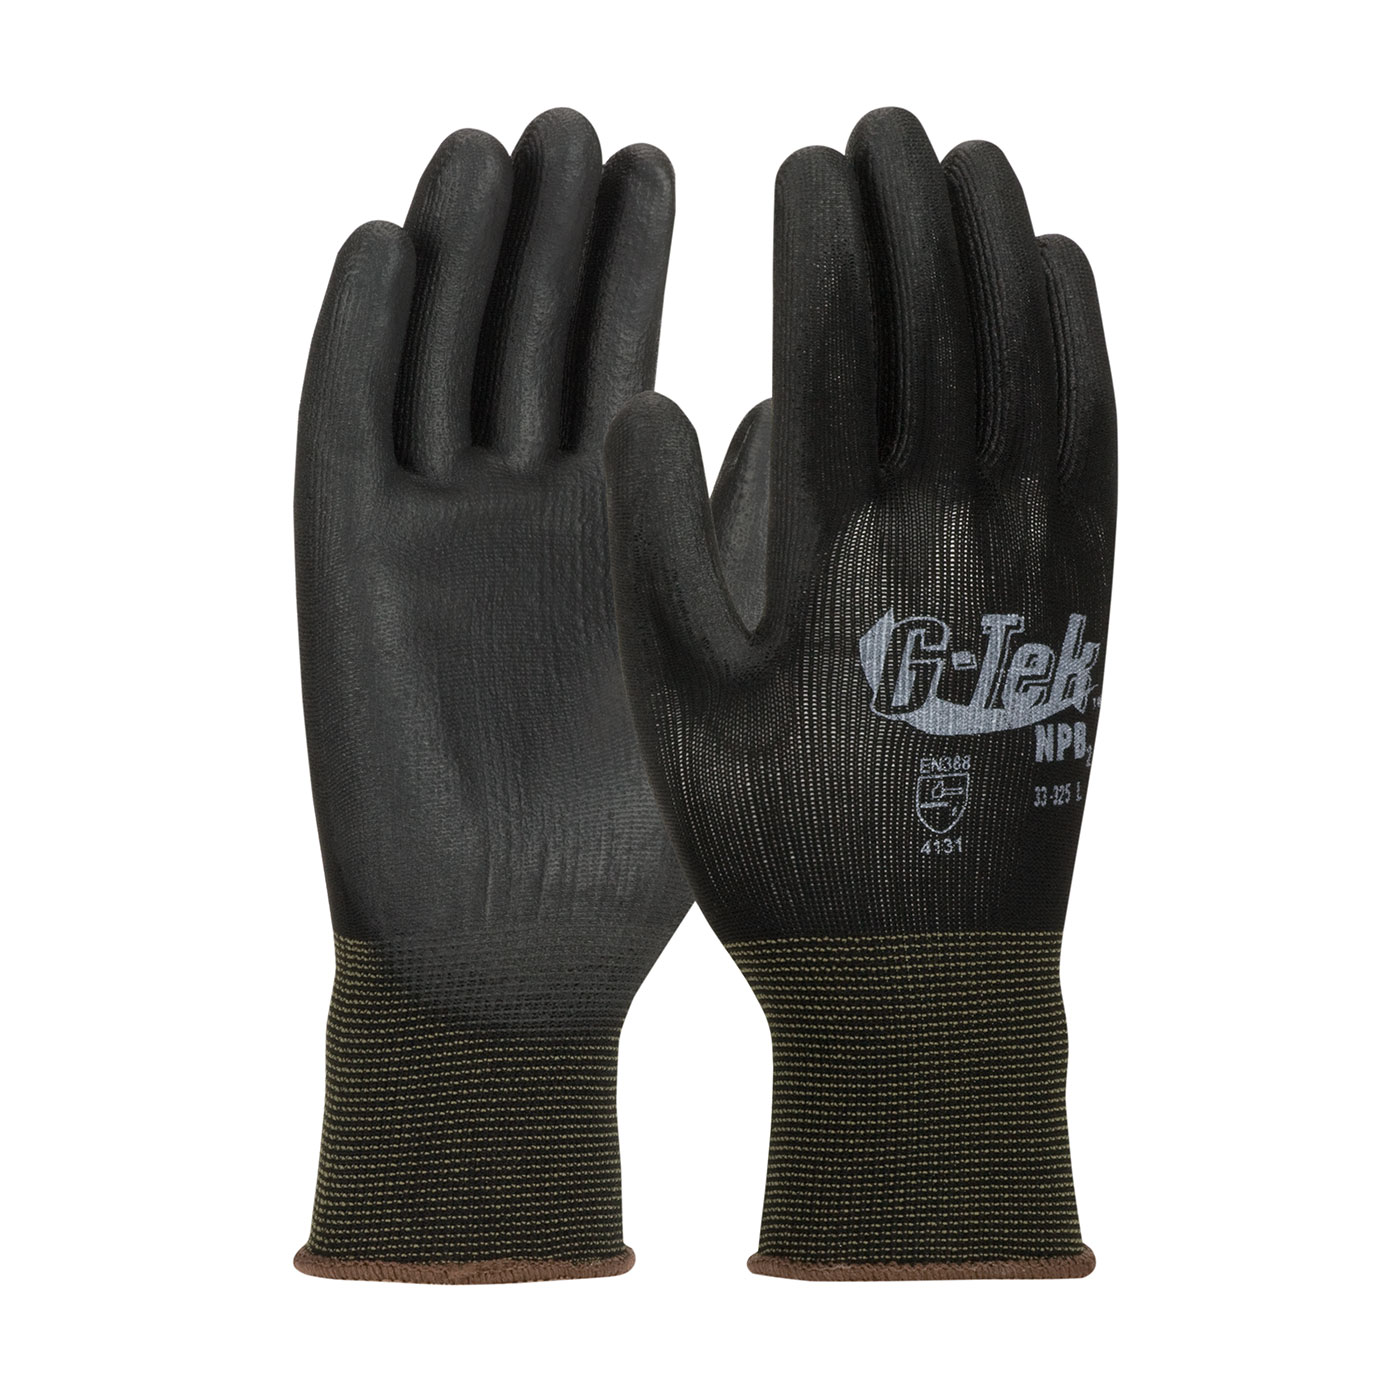 PIP® Heavy Weight Seamless Knit Black Nylon Glove with Extra Thick Black Polyurethane Coated Smooth Grip on Palm & Fingers #33-325